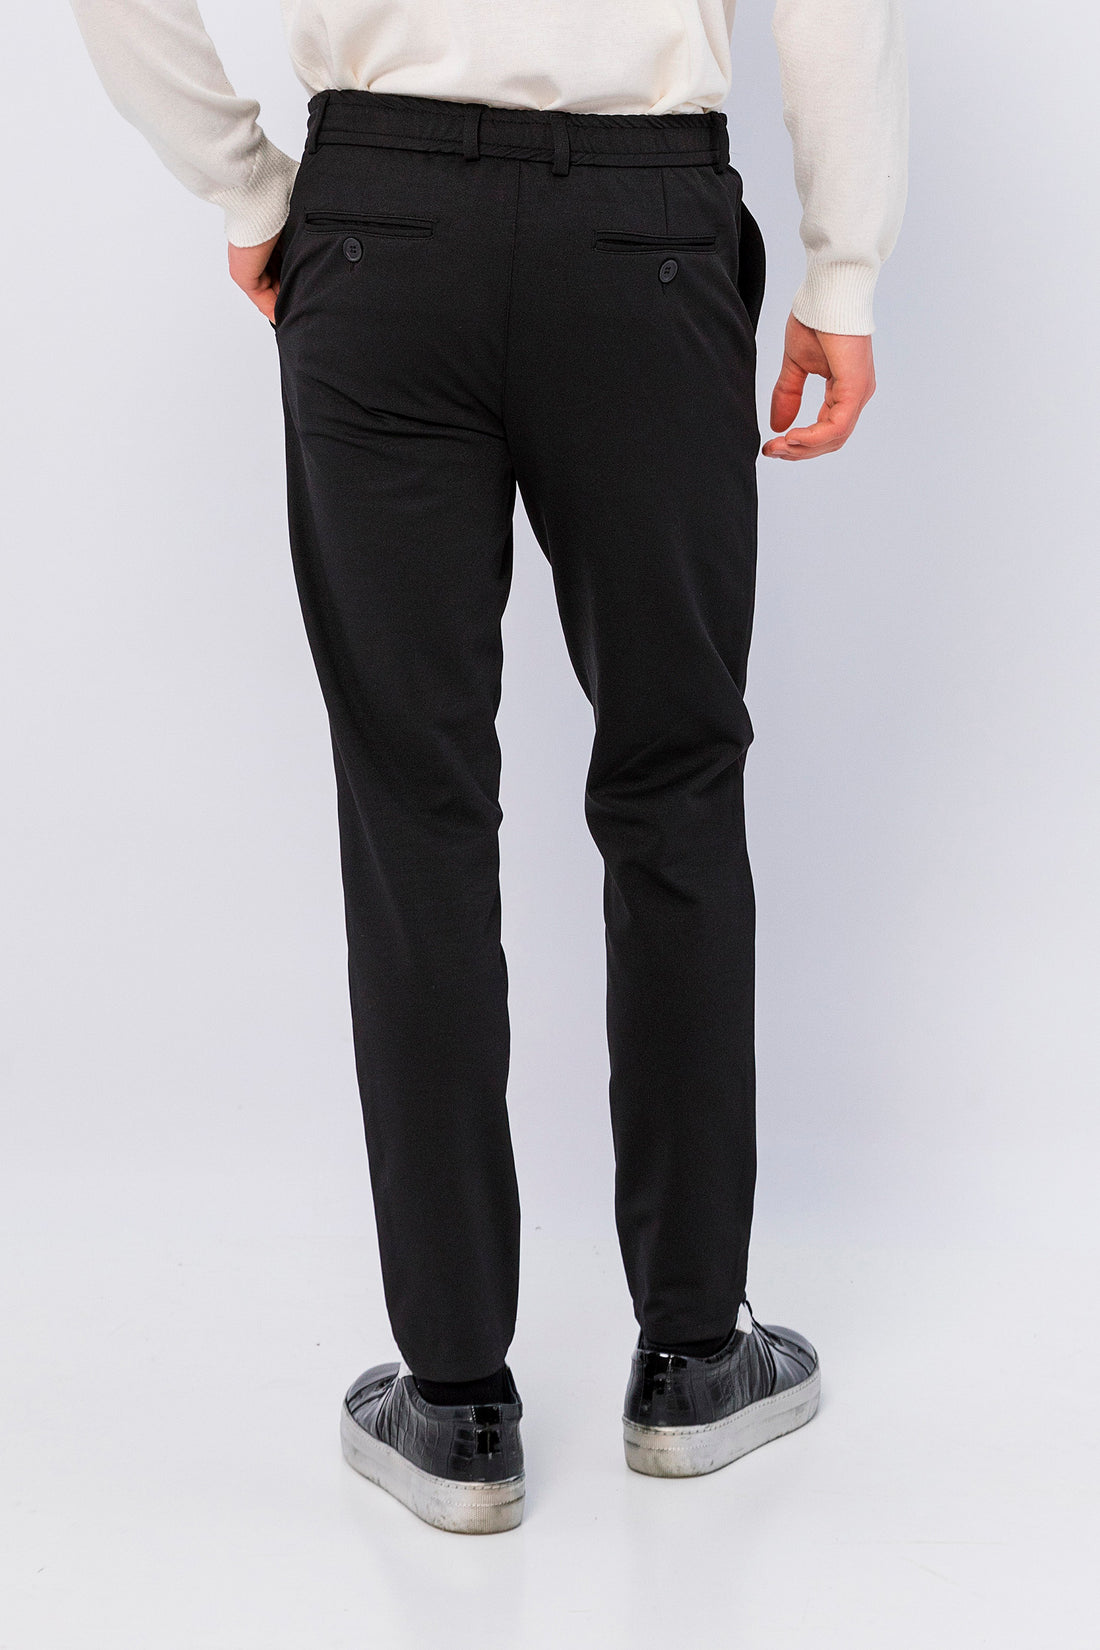 Fitted Casual Everyday Pants - Black